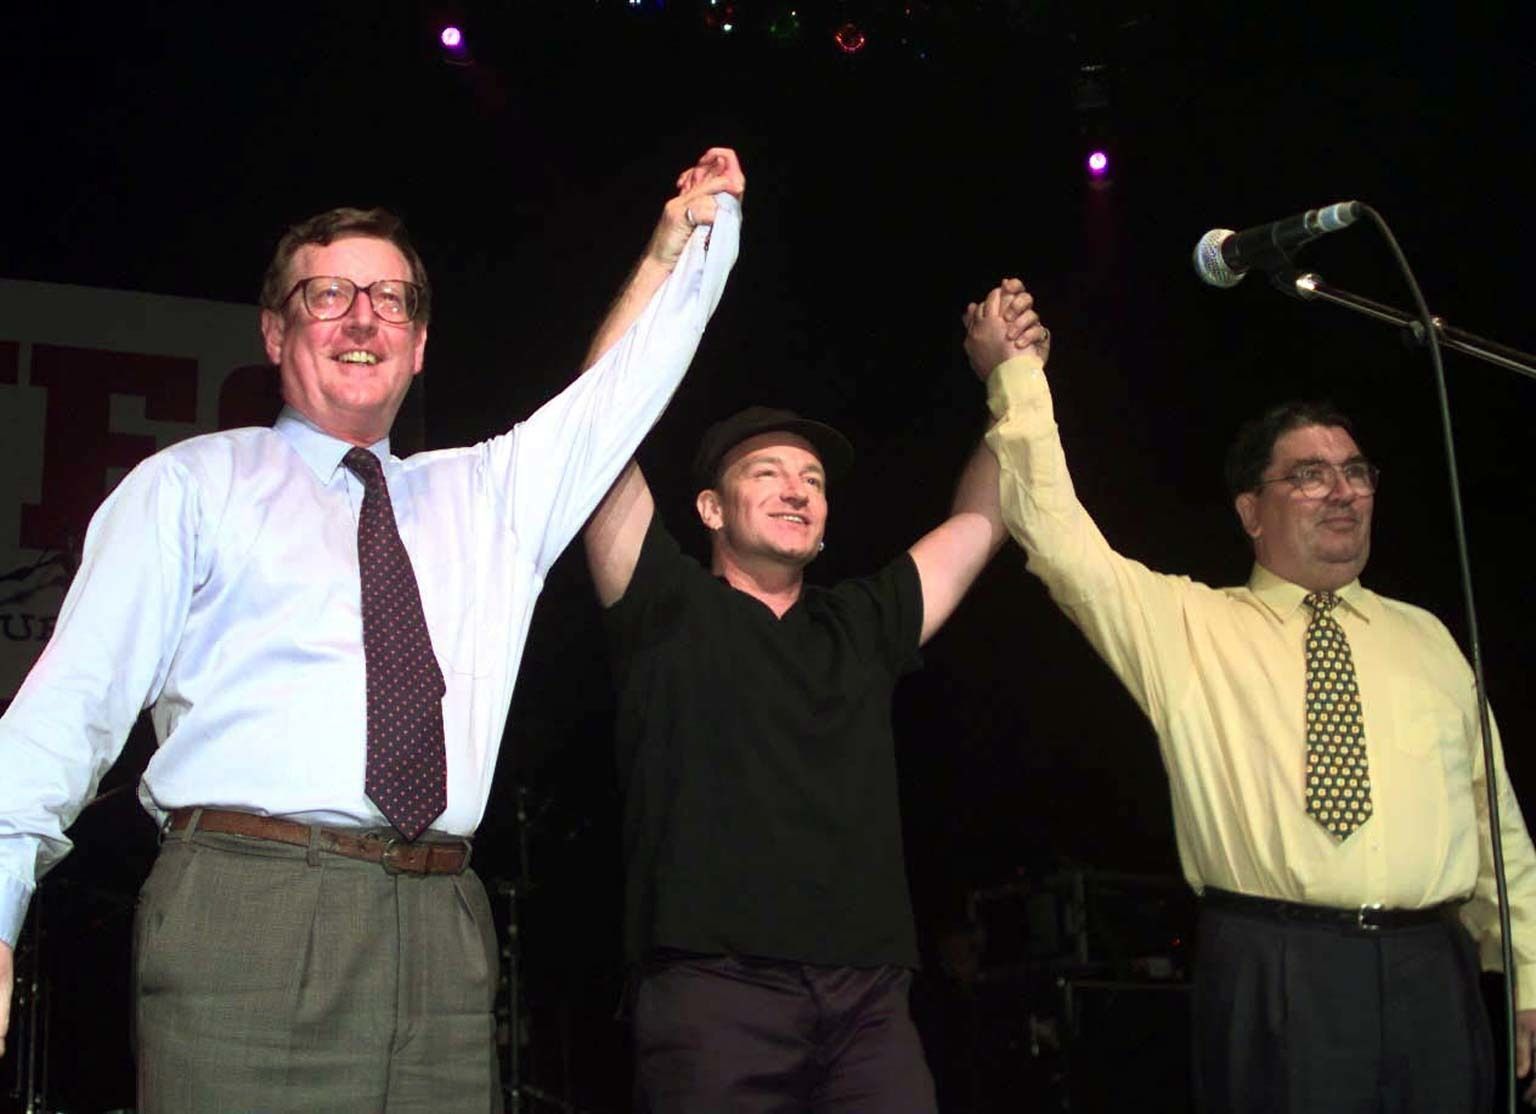 Trimble and Hume joined U2's Bono on stage during a special concert in Belfast to promote the "Yes" vote in the peace referendum in 1998